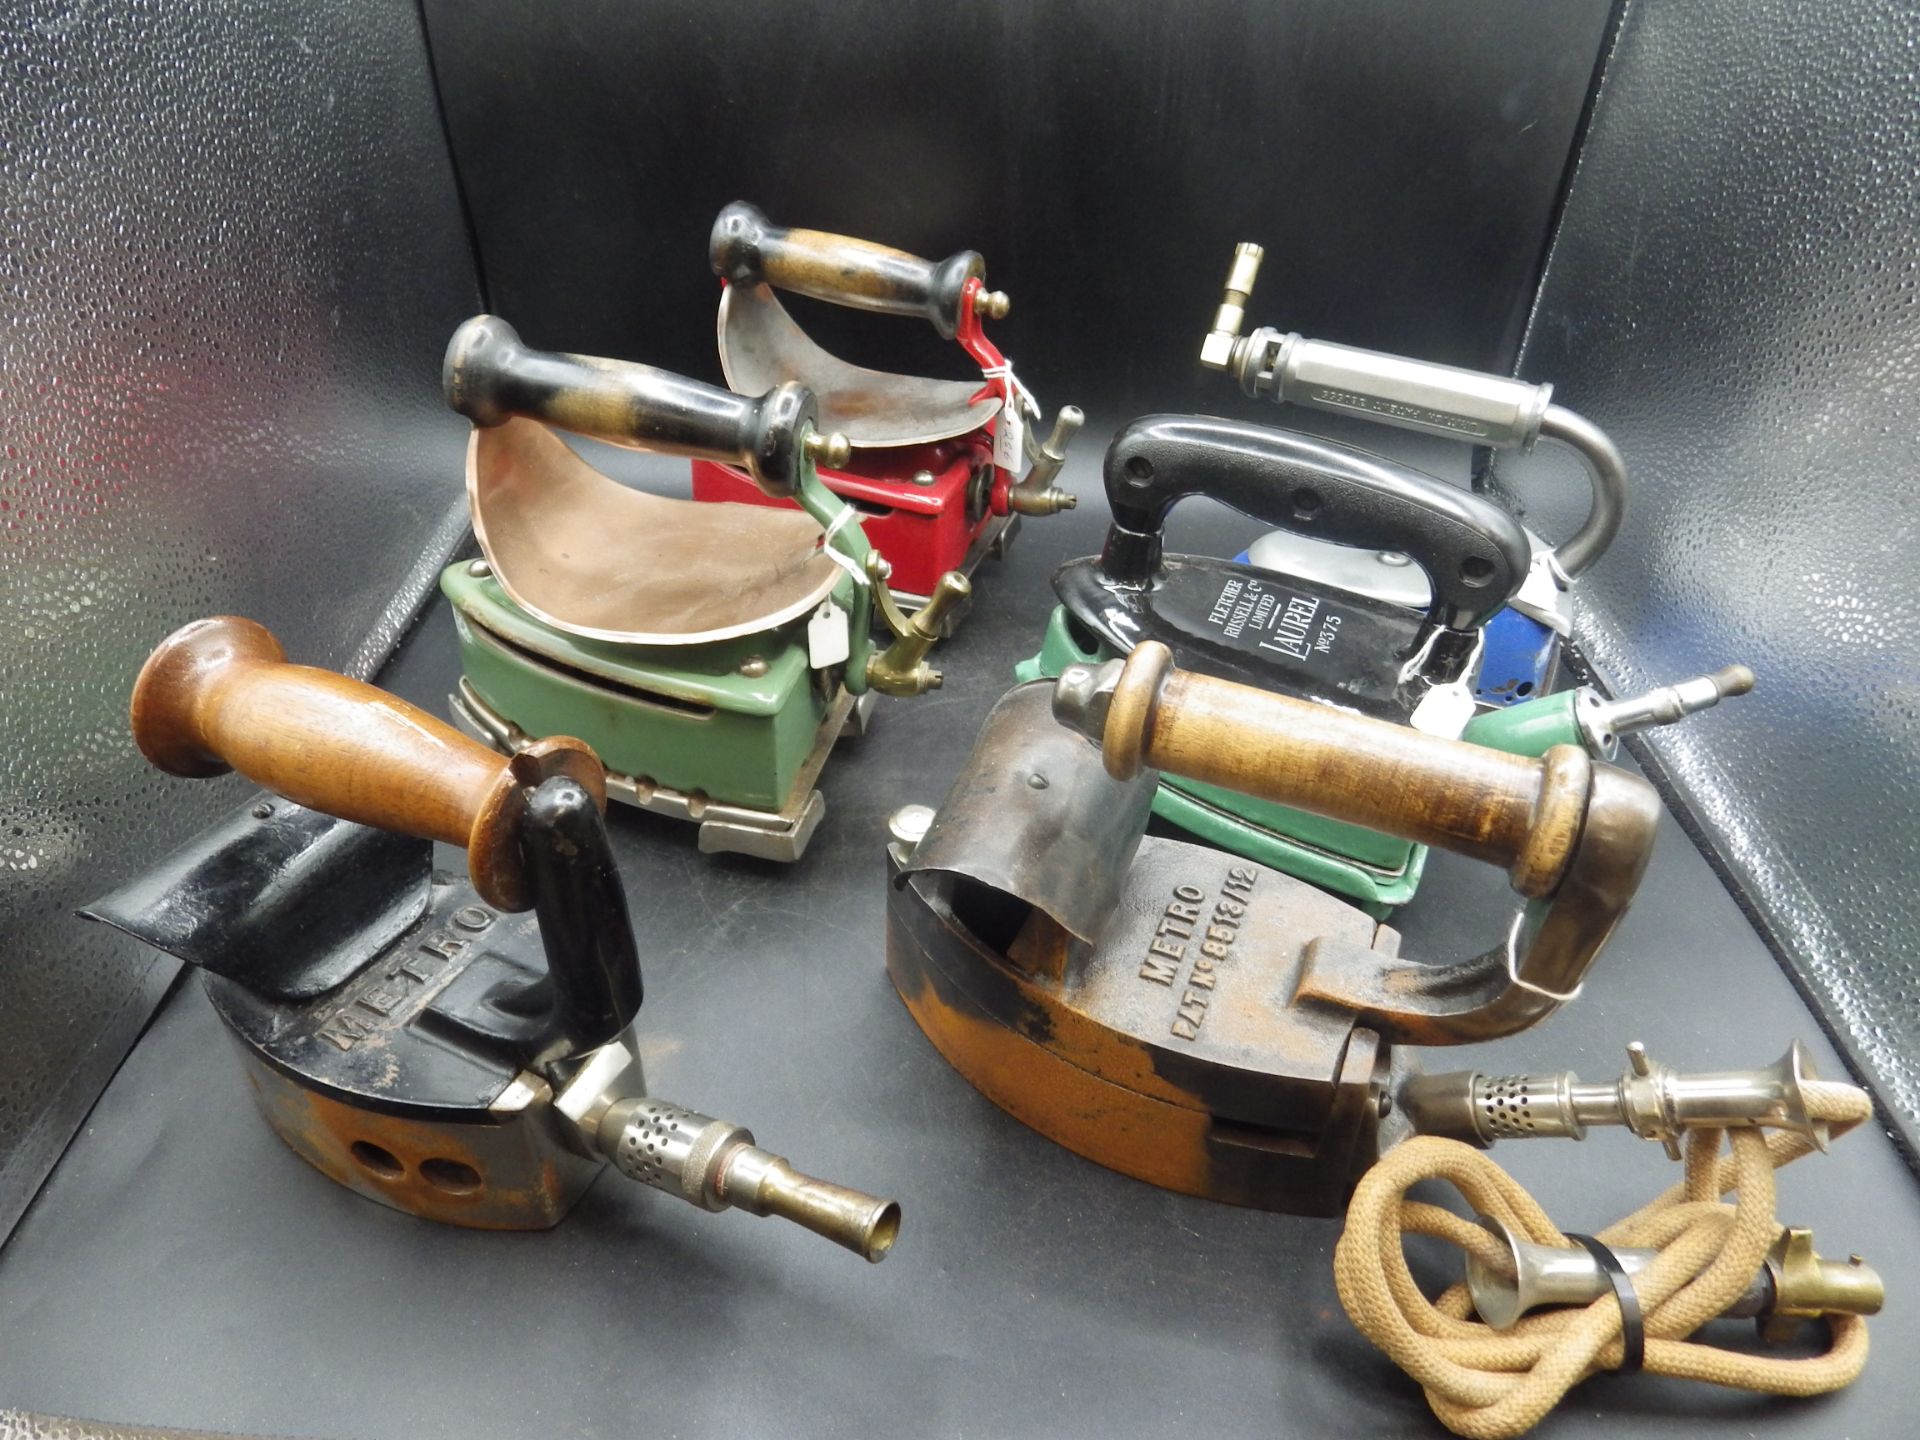 3 Fletcher Russel & Co enamel 'Laurel' gas irons, all with trivets and 2 with heat shields